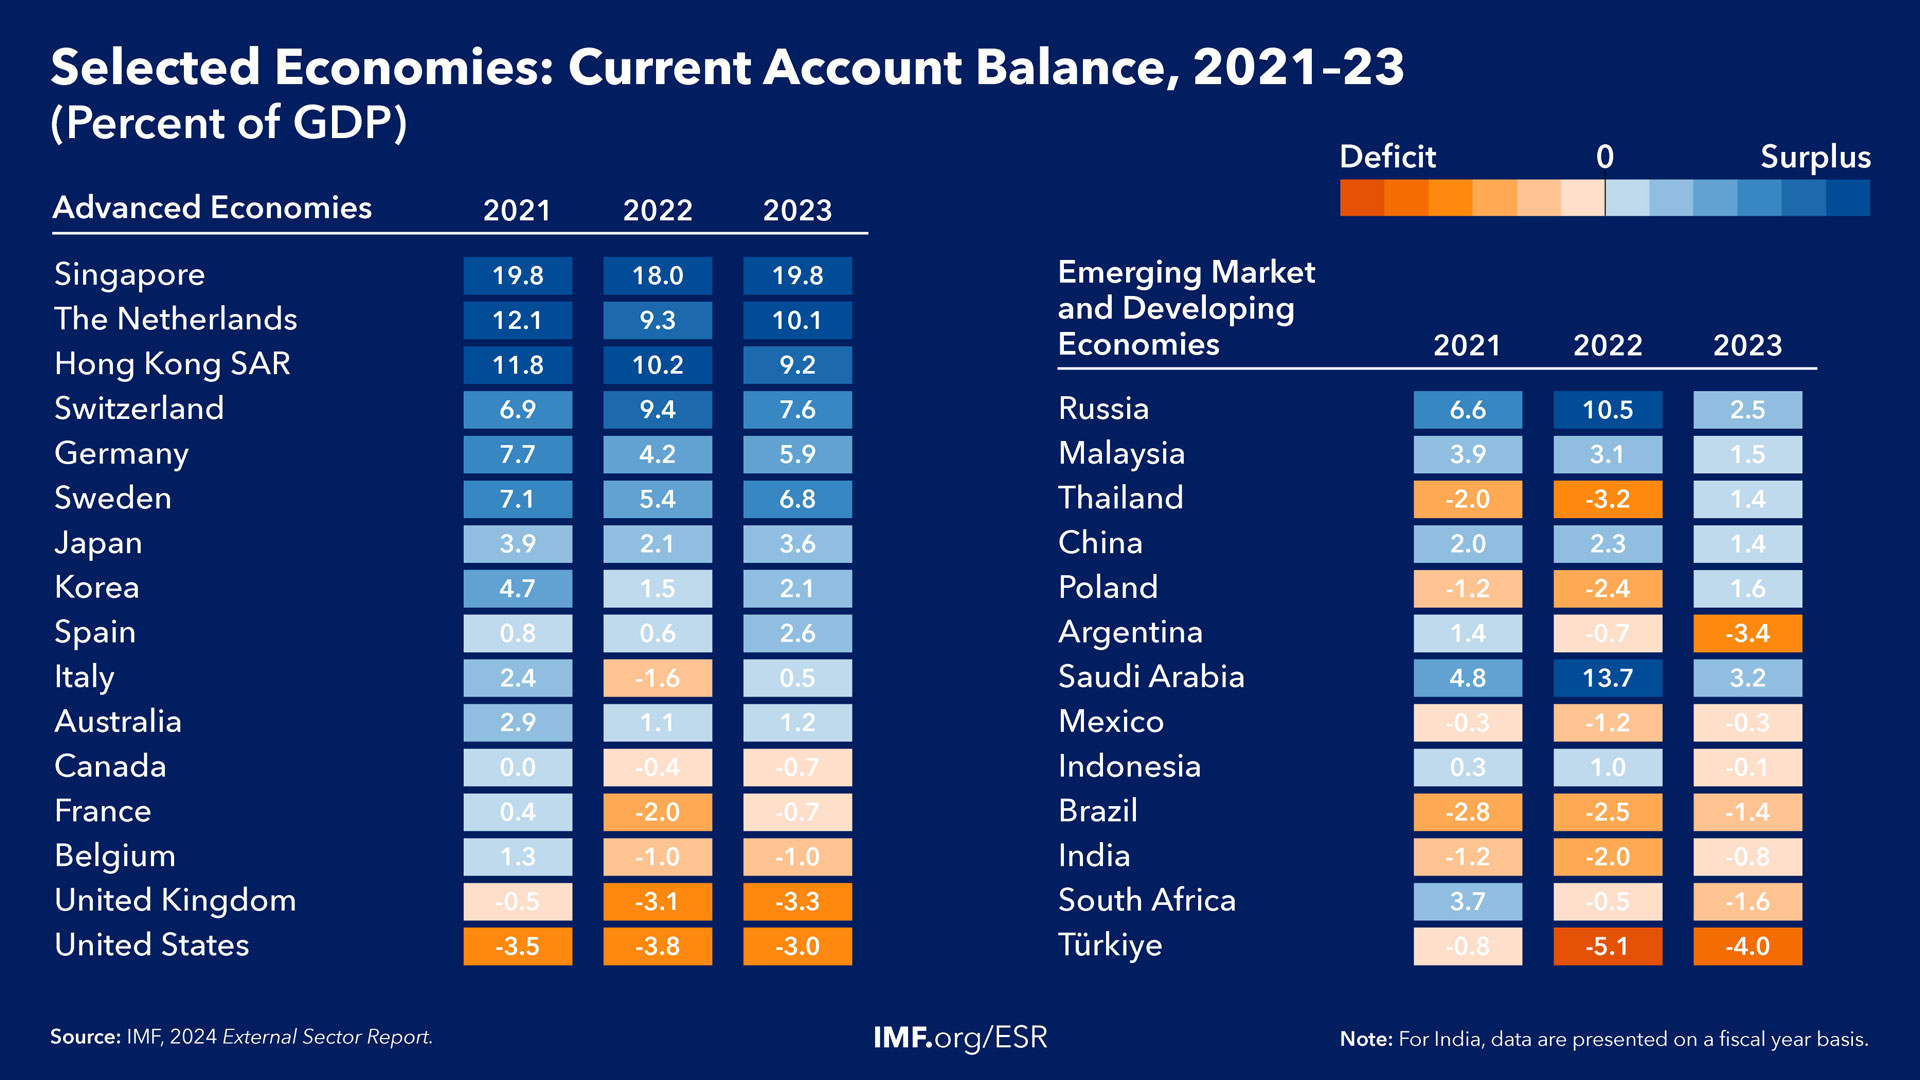 Selected Economies: Current Account Balance, 2021-23 (Percent of GDP)